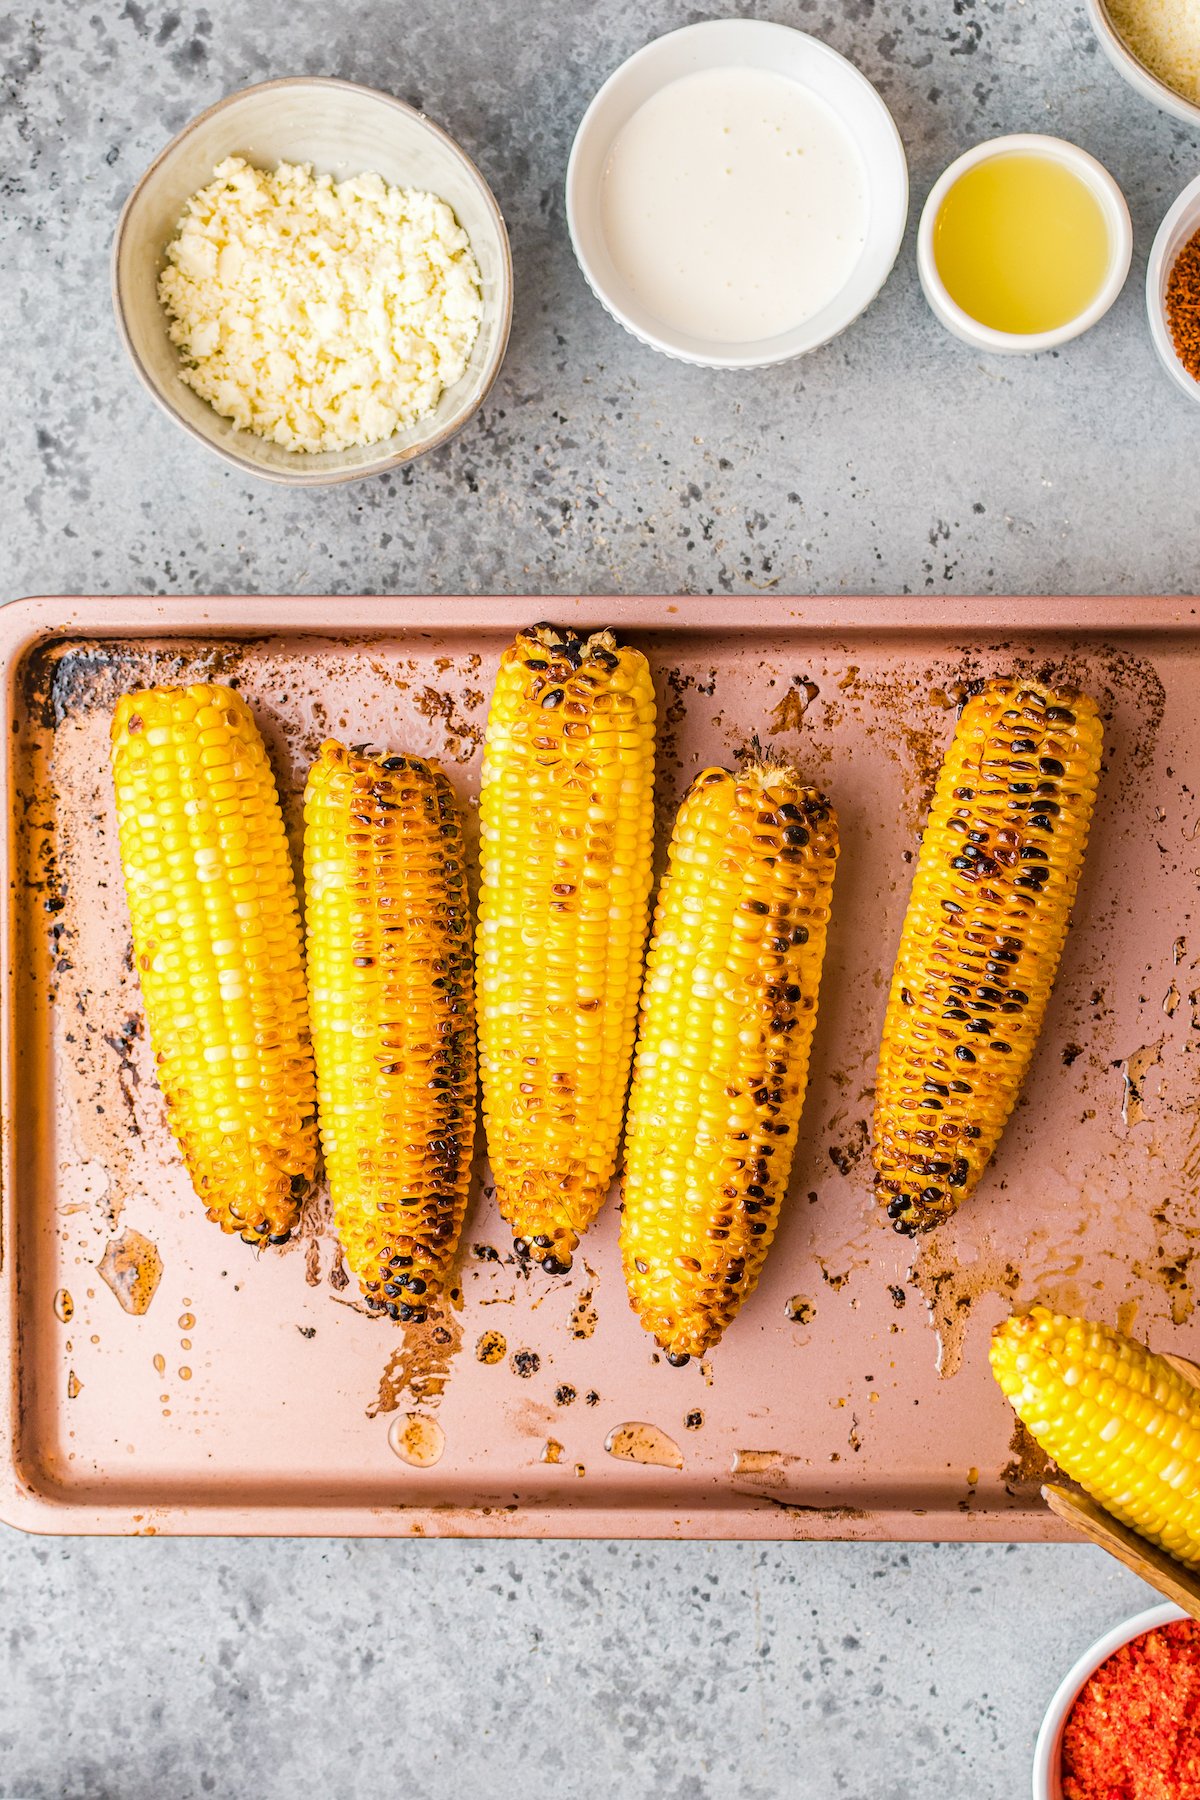 Broiled corn, lightly charred in places, on a baking sheet.